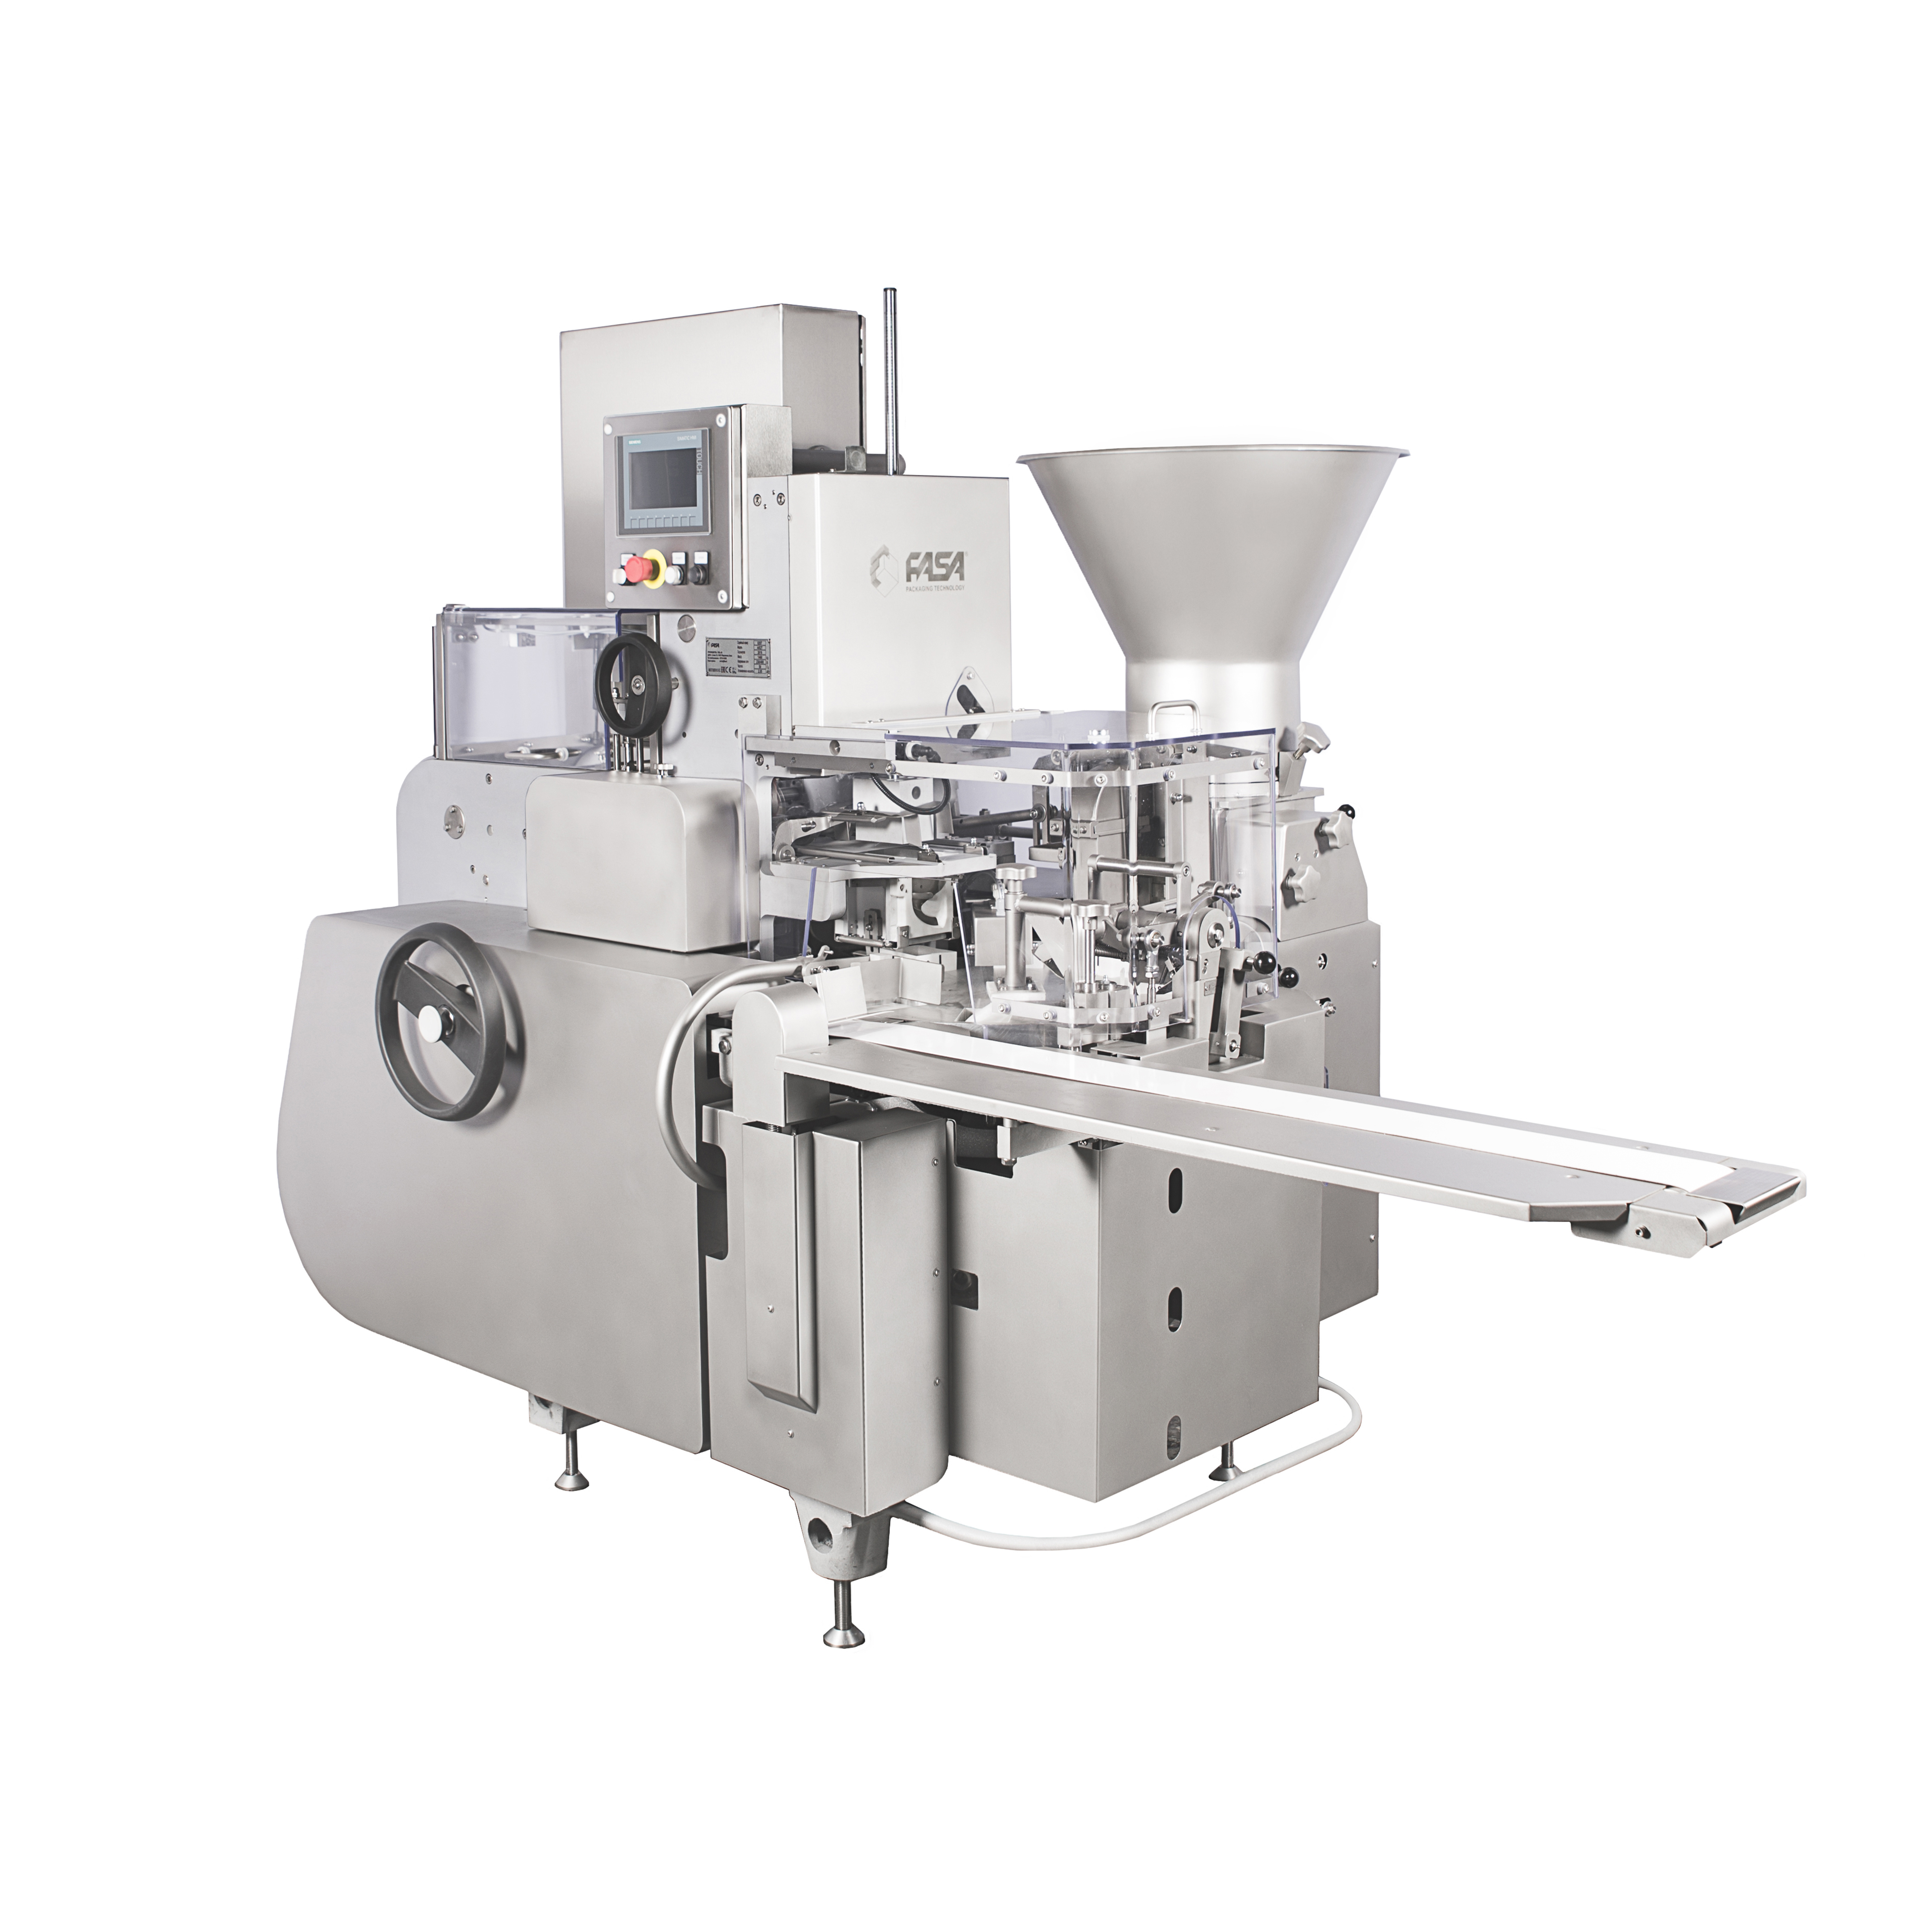 Curd filling and wrapping machine